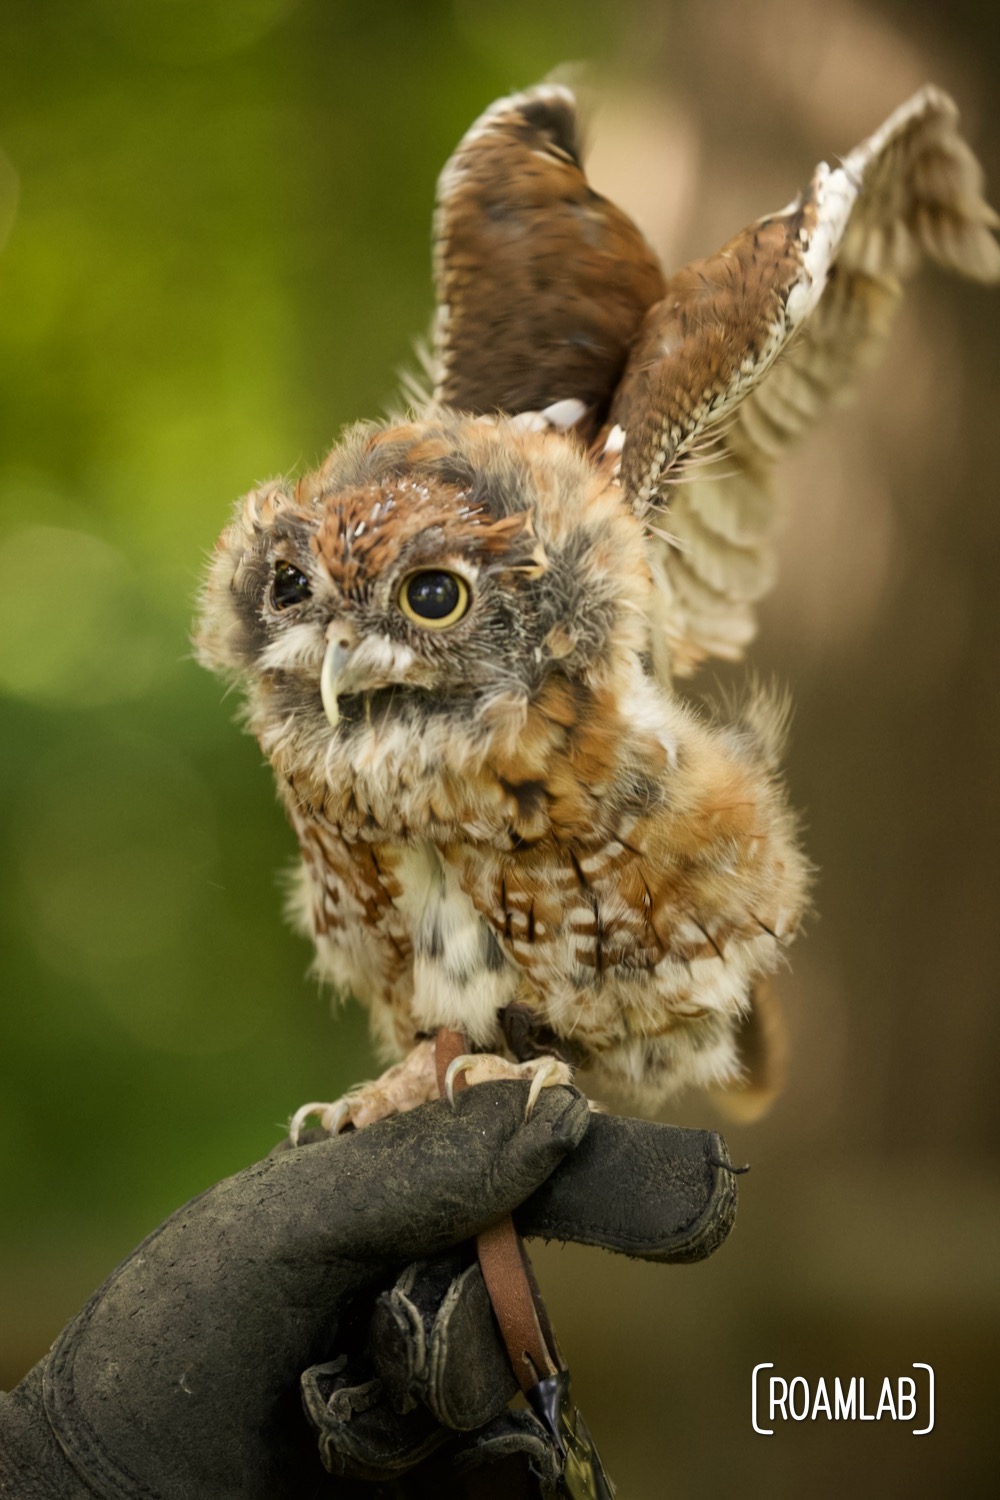 A molting screech owl spreads its wings while perched on a Woodlands Nature Station staff member's finger.